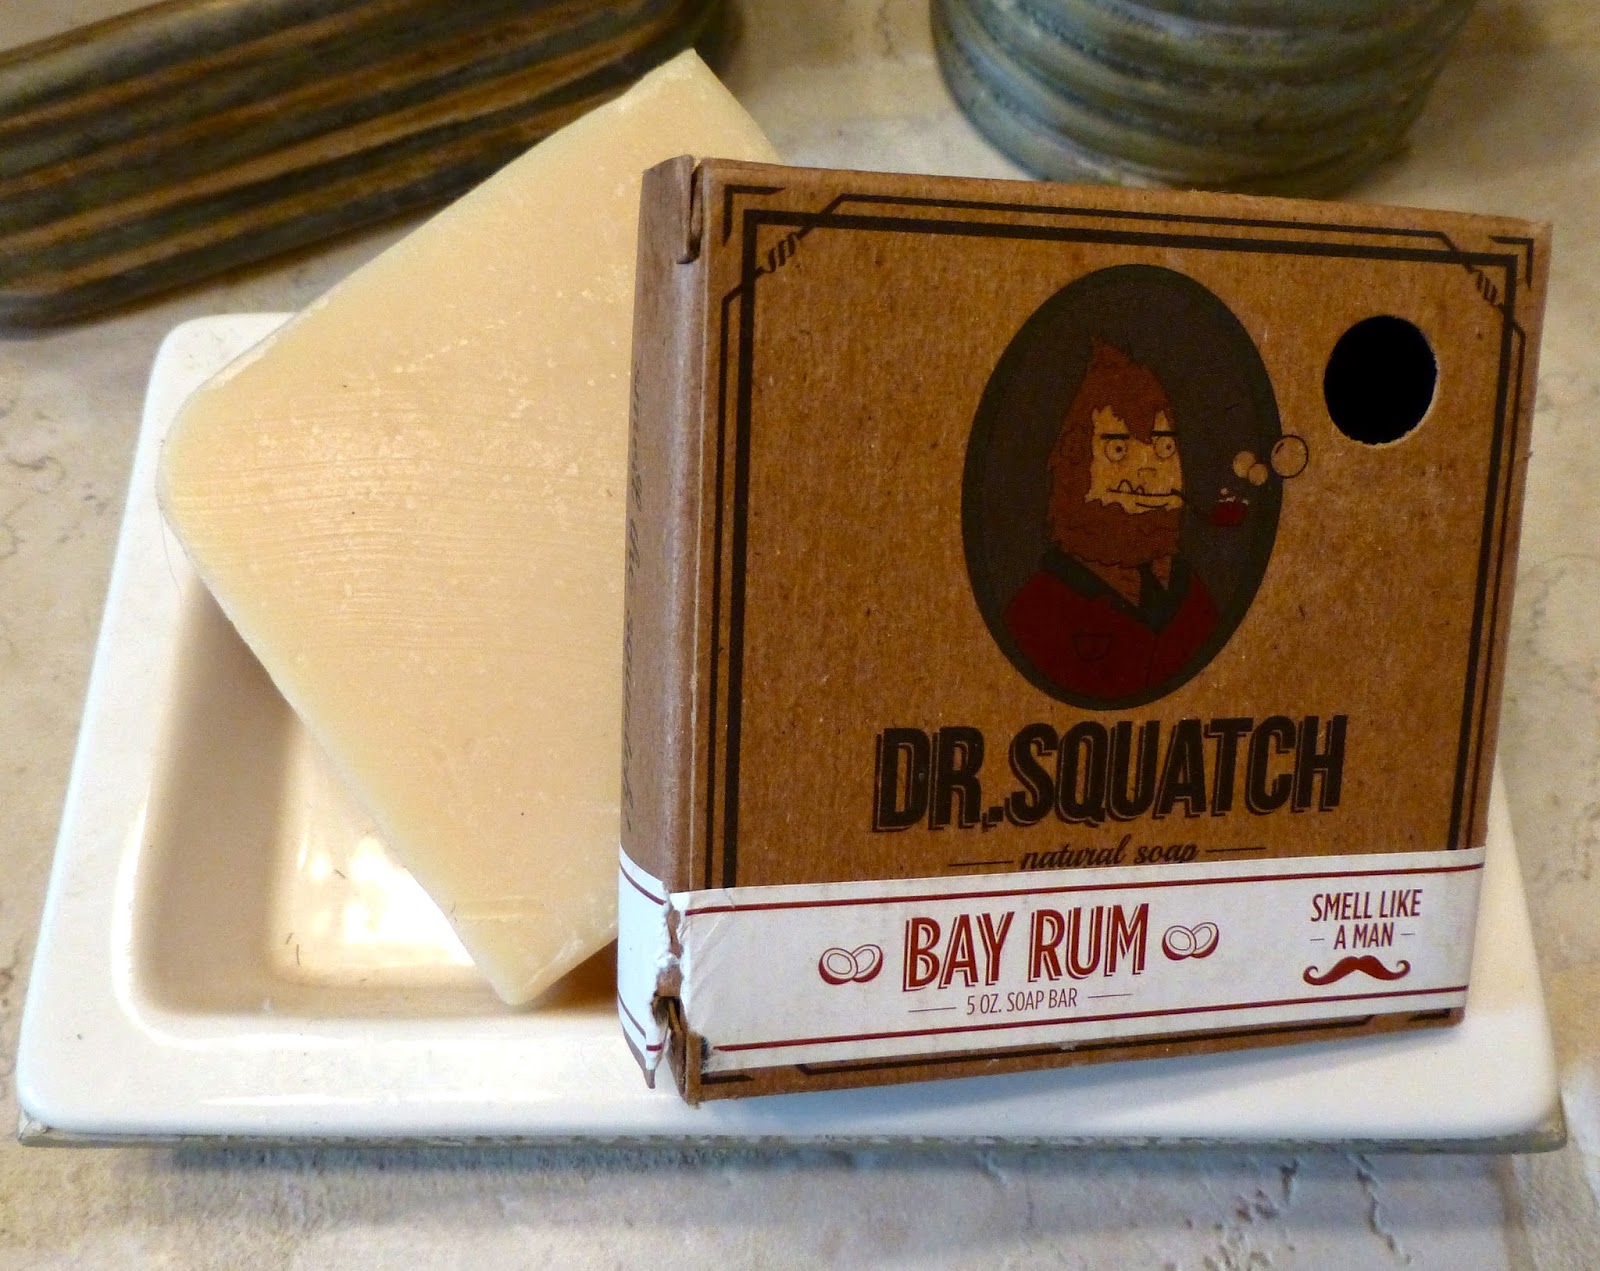 I Have Used Dr. Squatch Soap for a Year. What Do I Think?